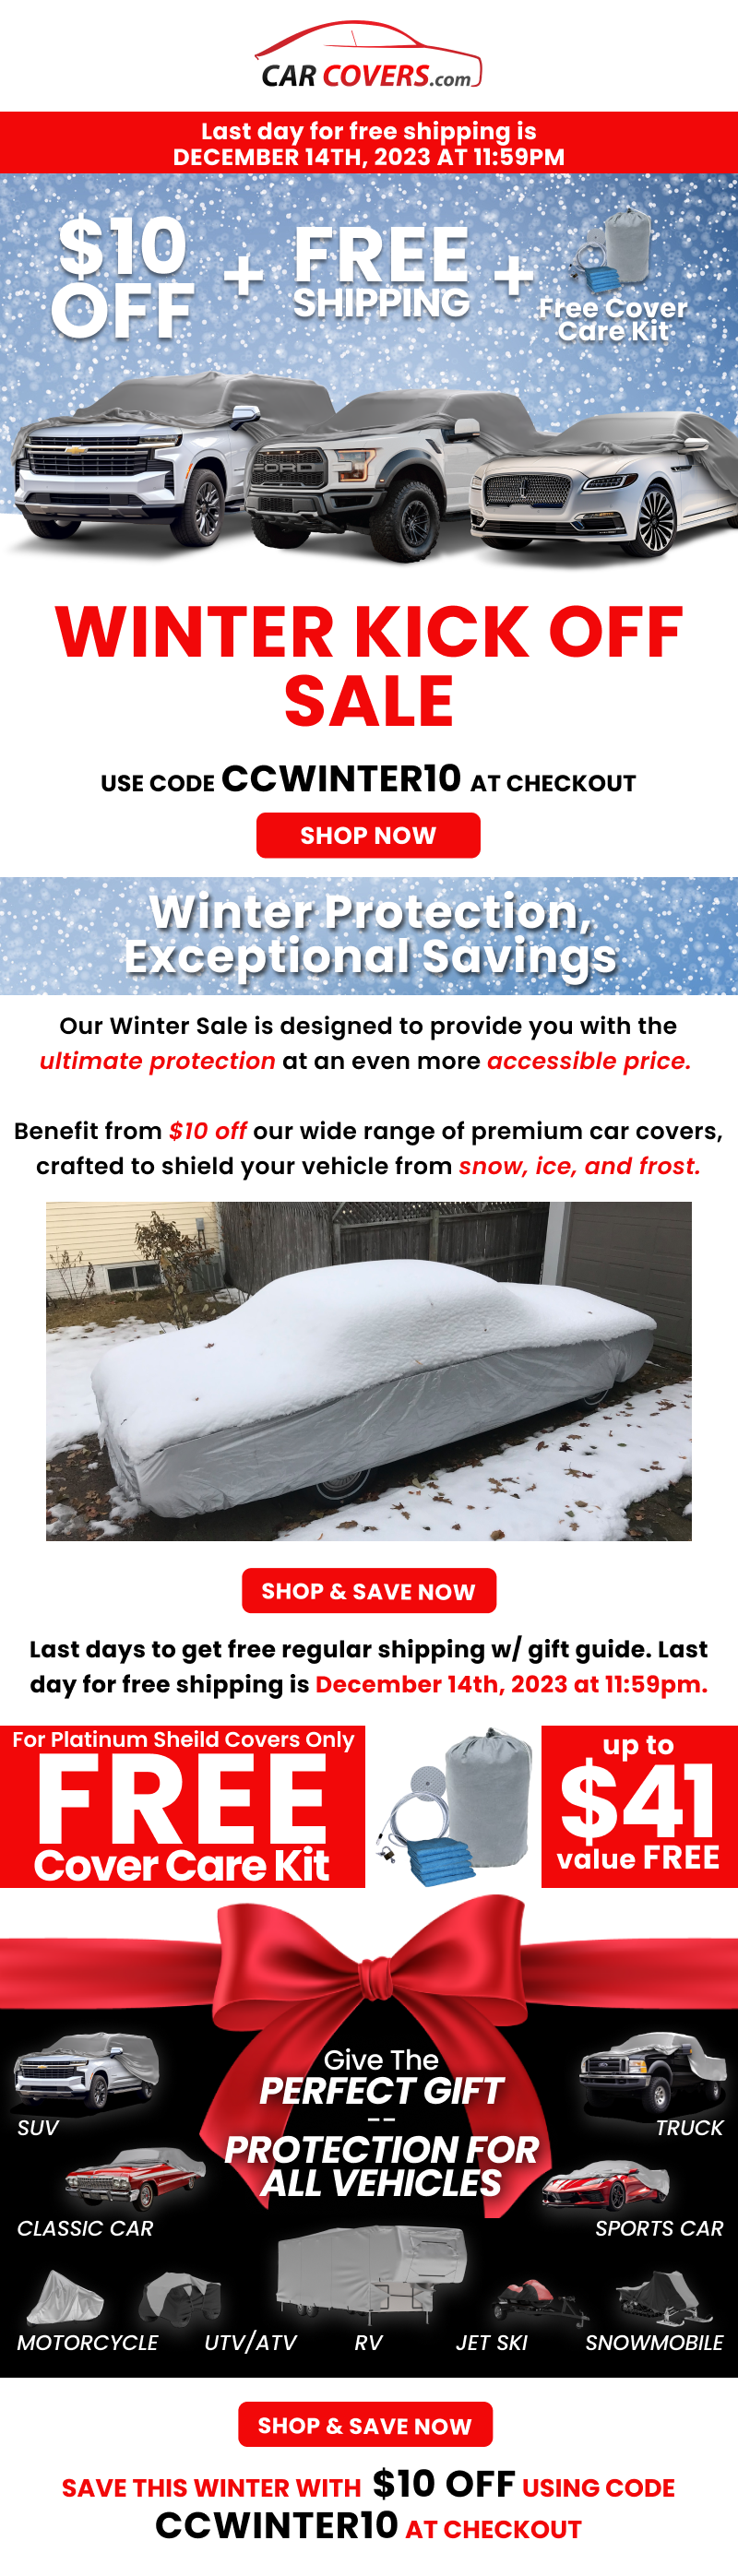 Platinum Shield Car Covers - Up to 50% OFF + Lifetime Warranty